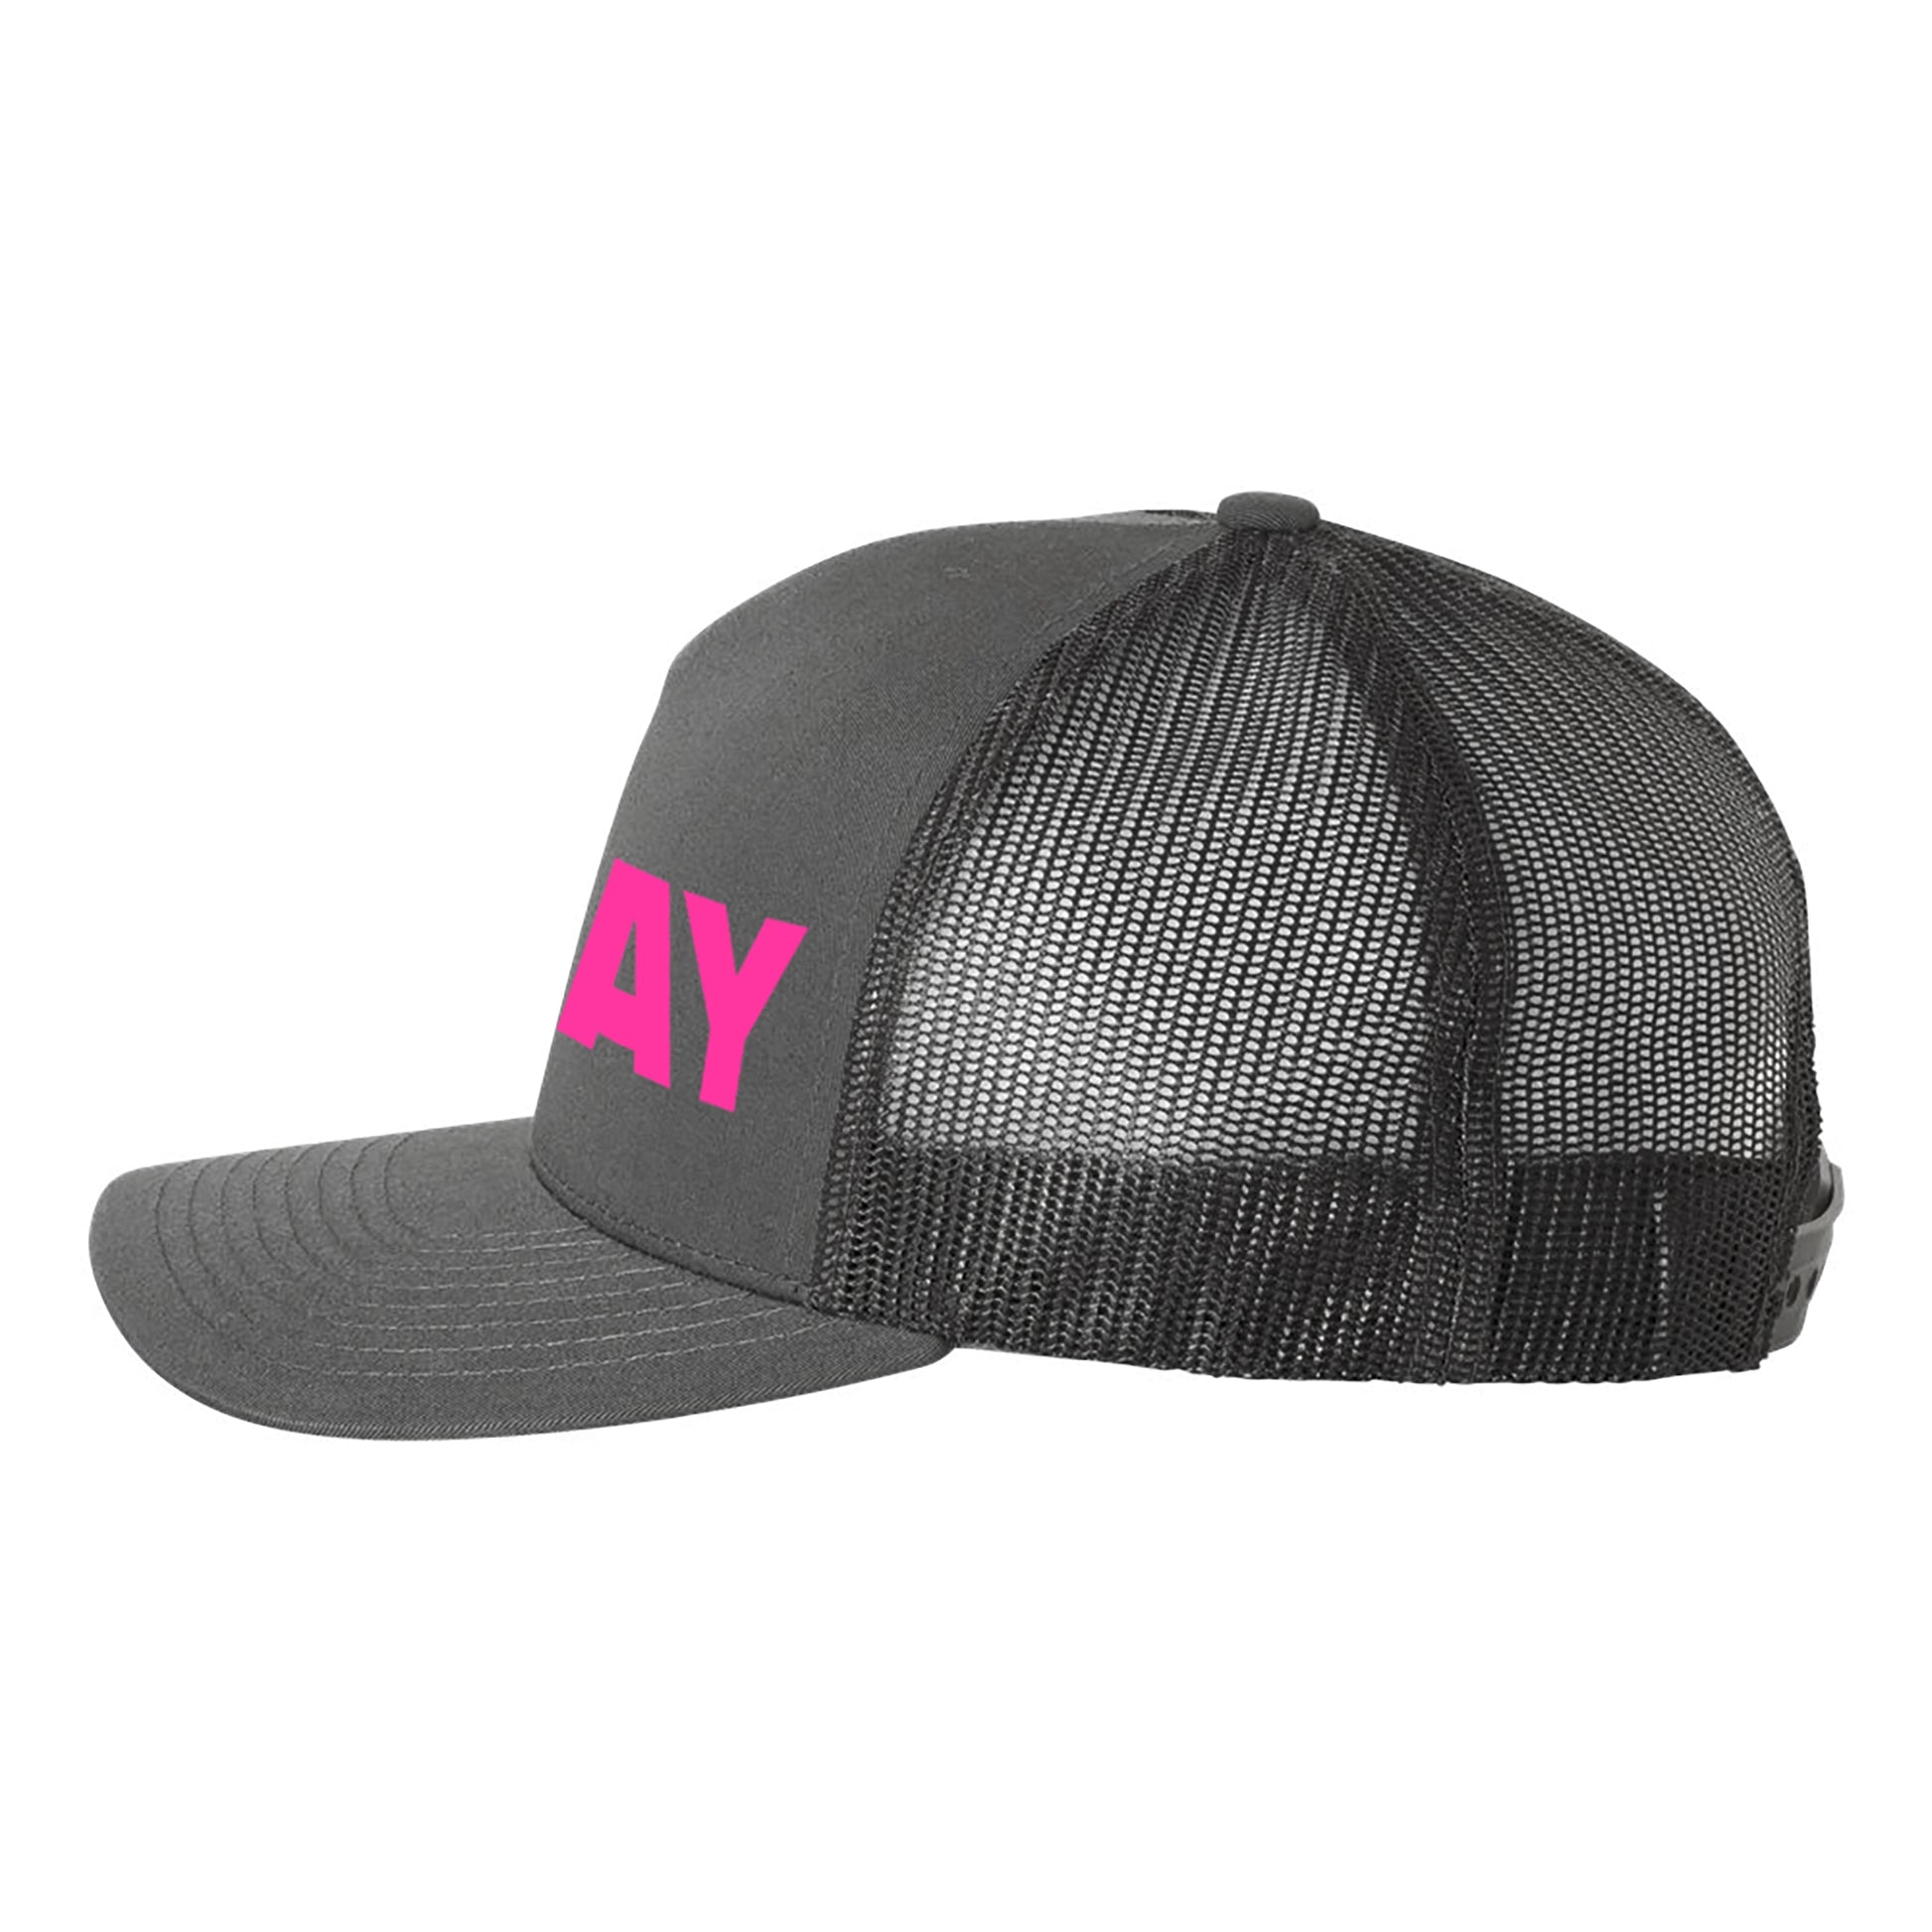 Gray and Gay ball cap - side view - unisex charcoal snapback hat with fluorescent pink and dark grey matte text by BBJ / Glitter Garage